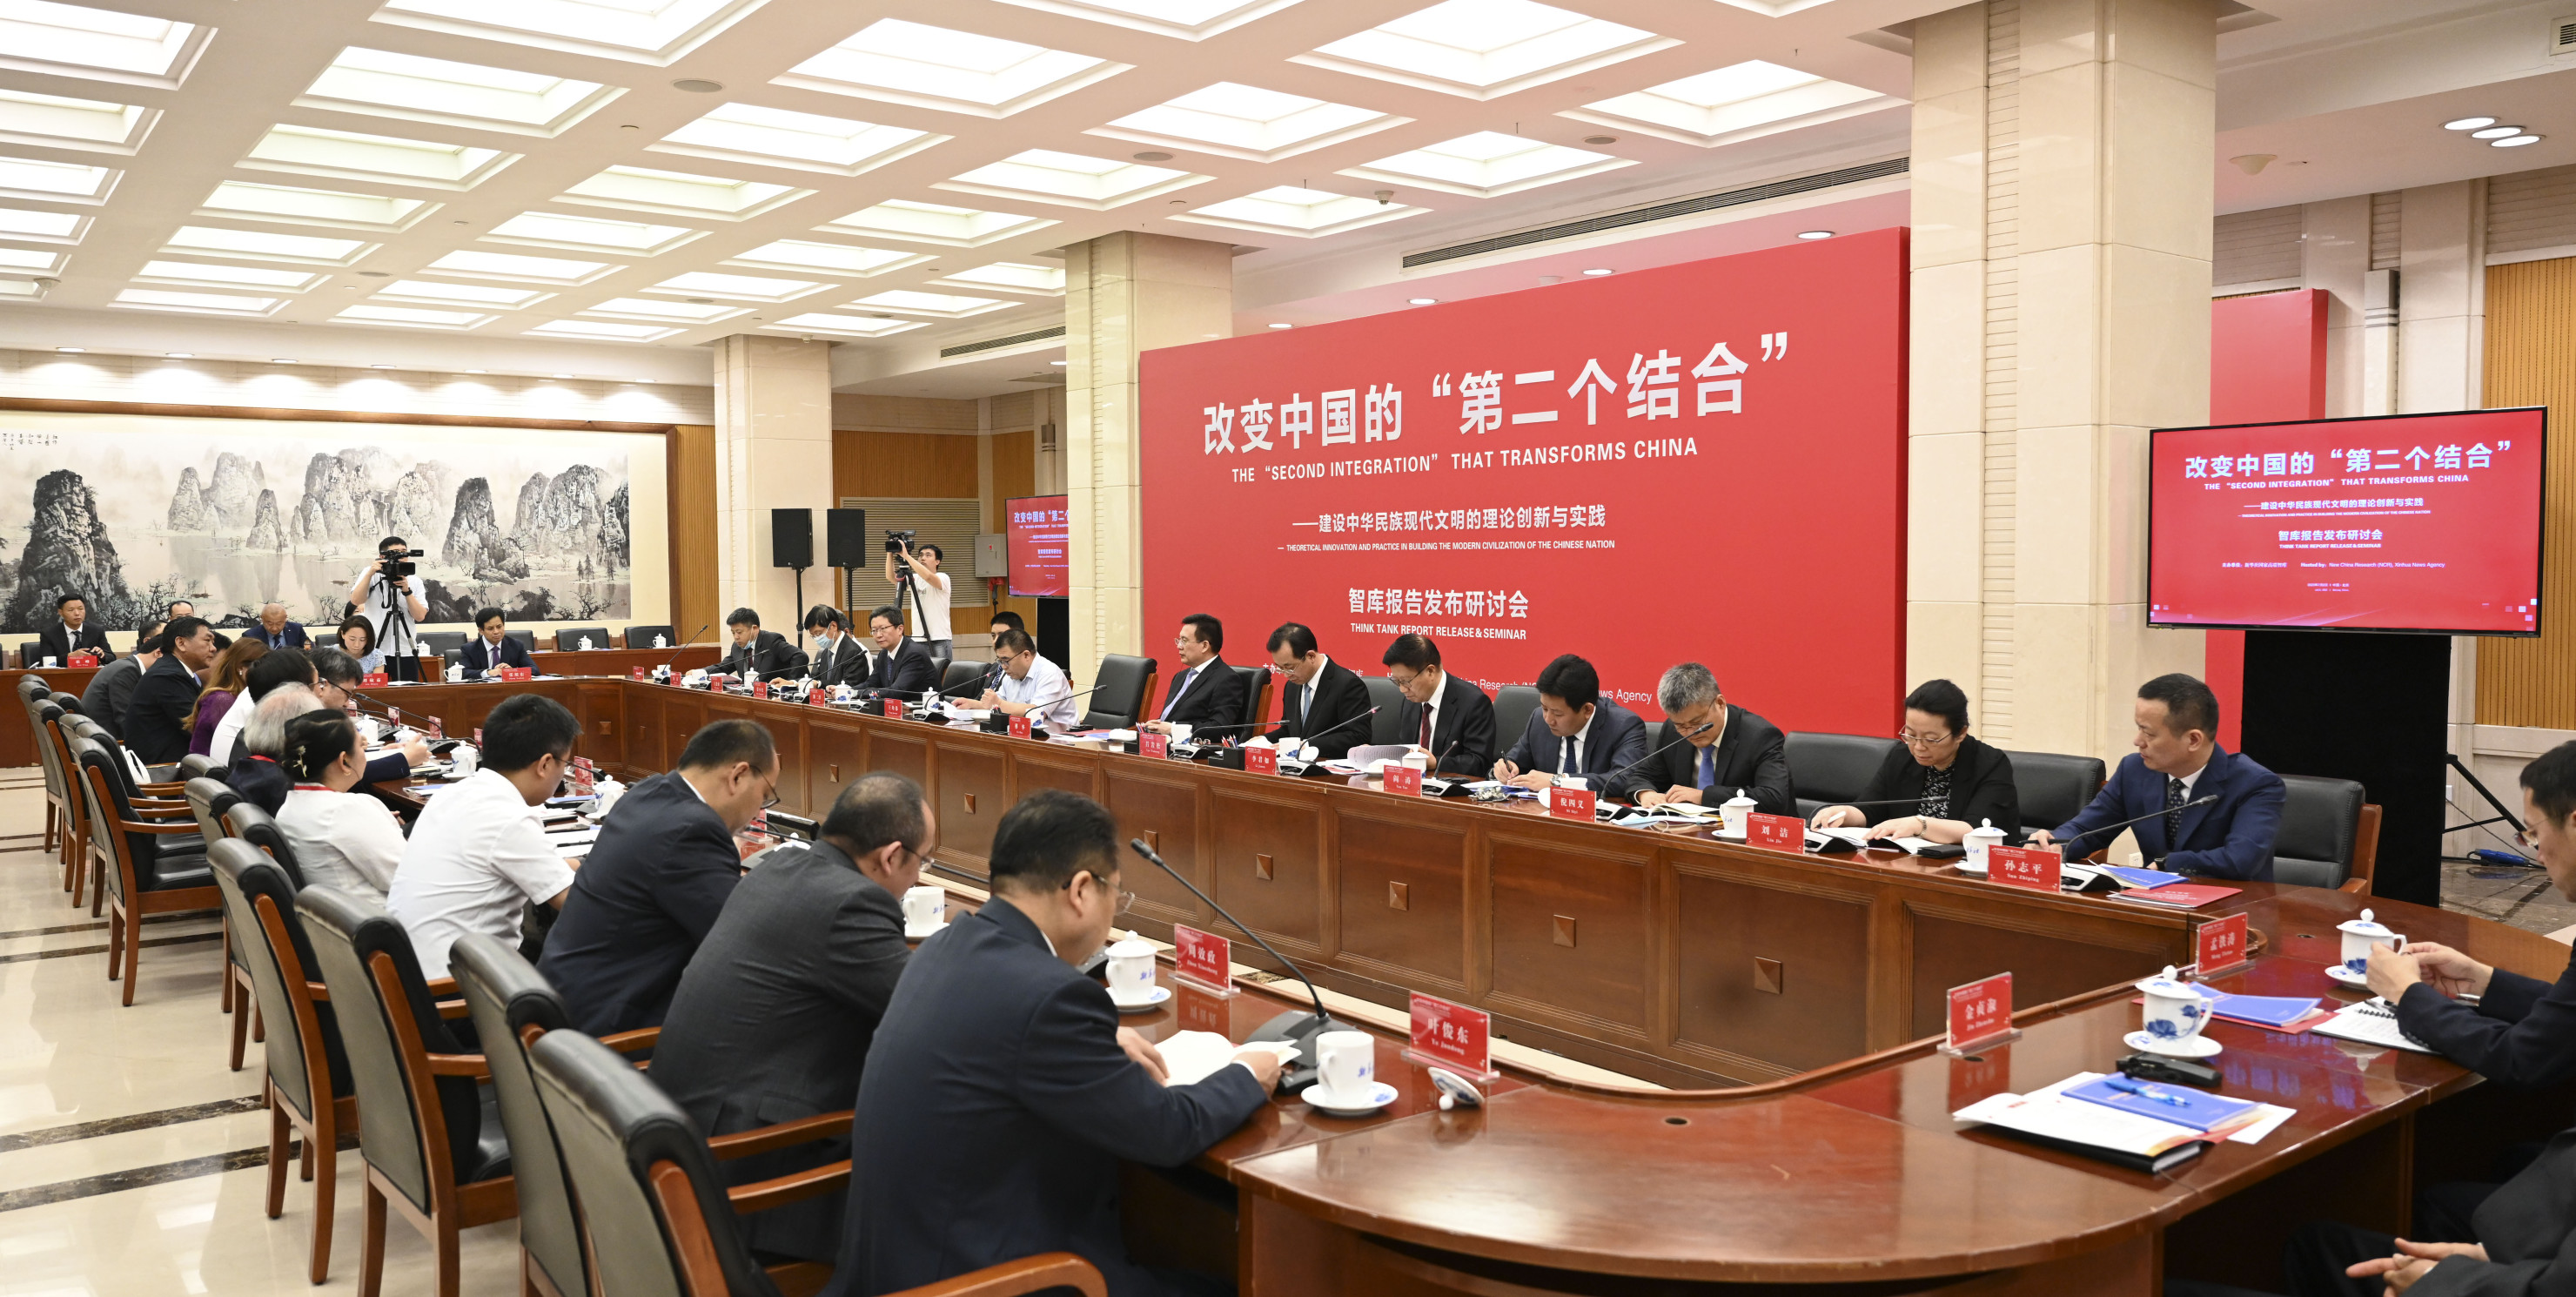 The New China Research, the think tank of Xinhua News Agency, launches a report titled "The 'Second Integration' that Transforms China -- Theoretical Innovation and Practice in Building the Modern Civilization of the Chinese Nation", July 2, 2023. 